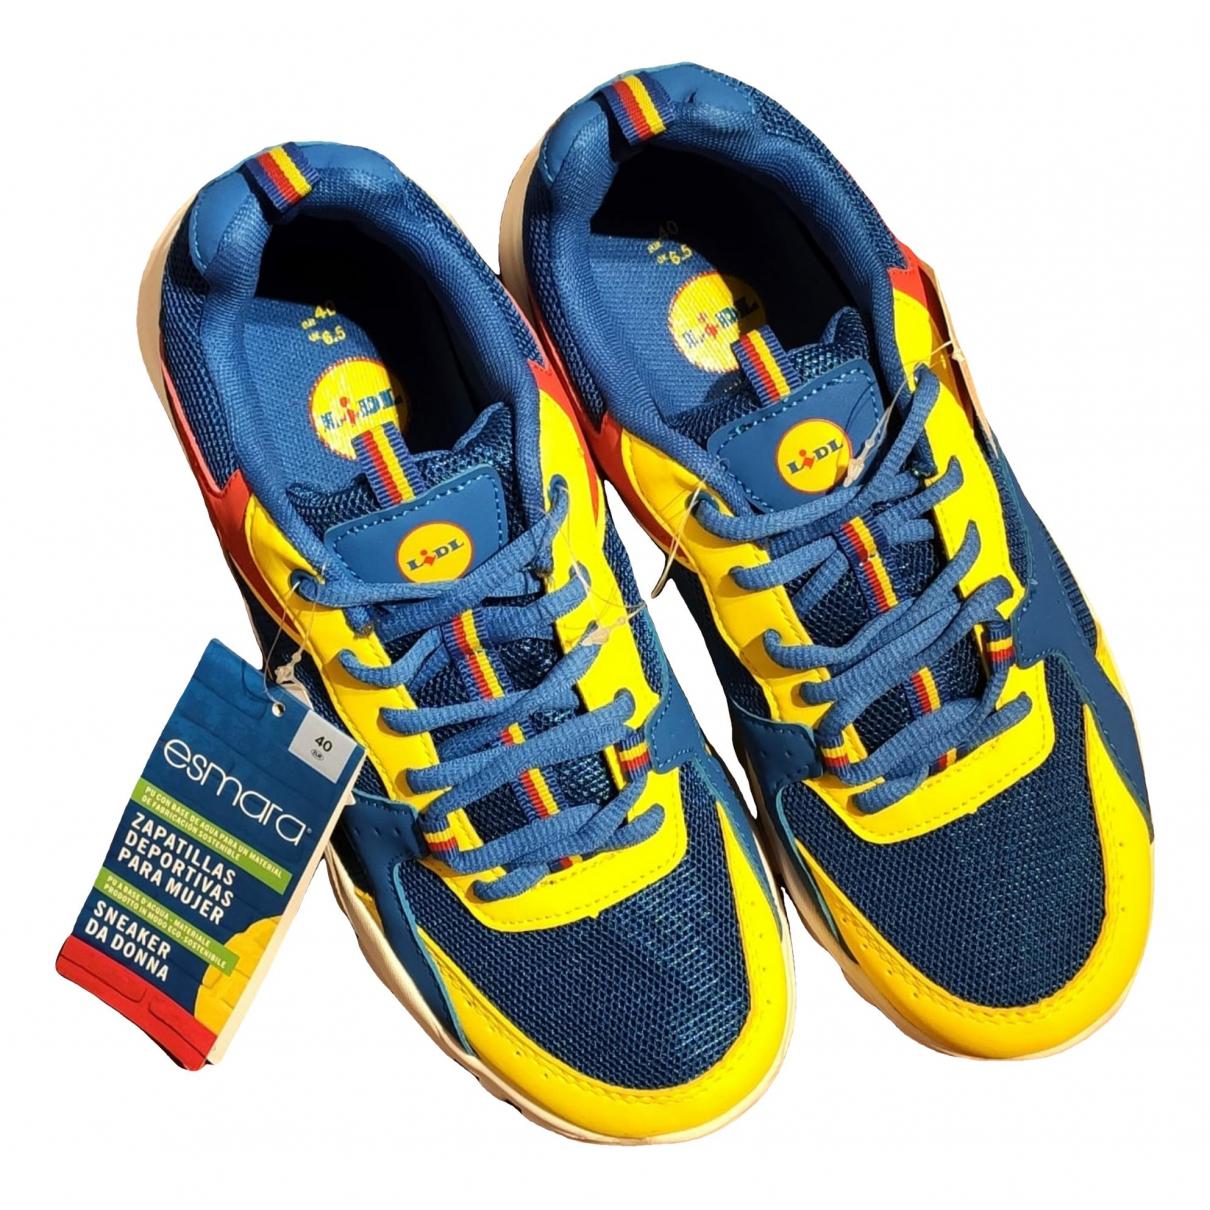 lidl shoes price